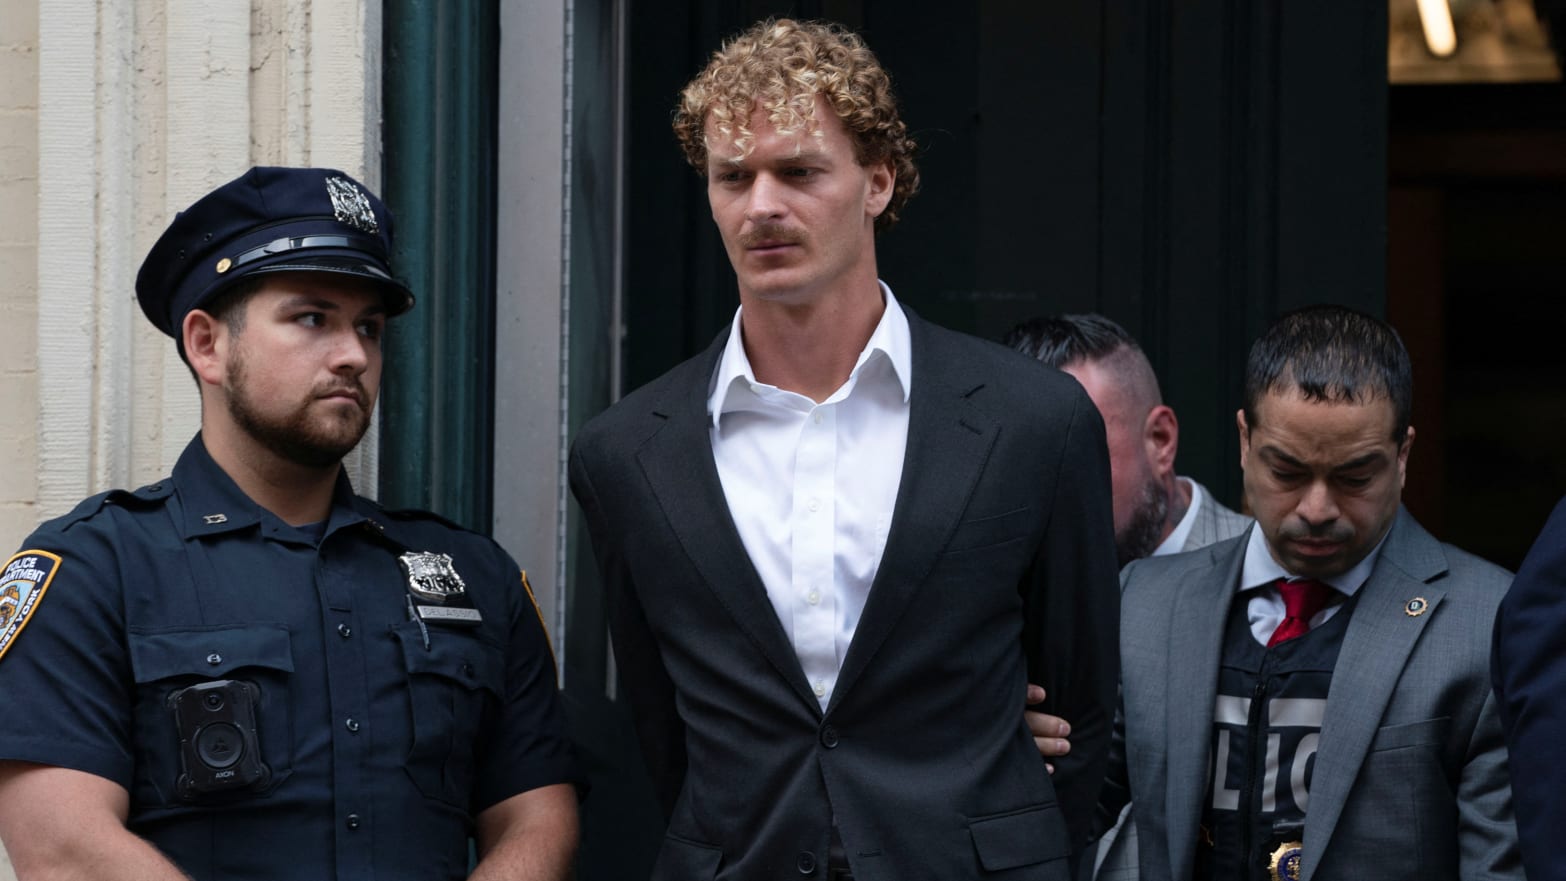 Former U.S. Marine Daniel Penny is taken from a New York City Police precinct under arrest for the death of Jordan Neely in New York City, U.S., May 12, 2023.